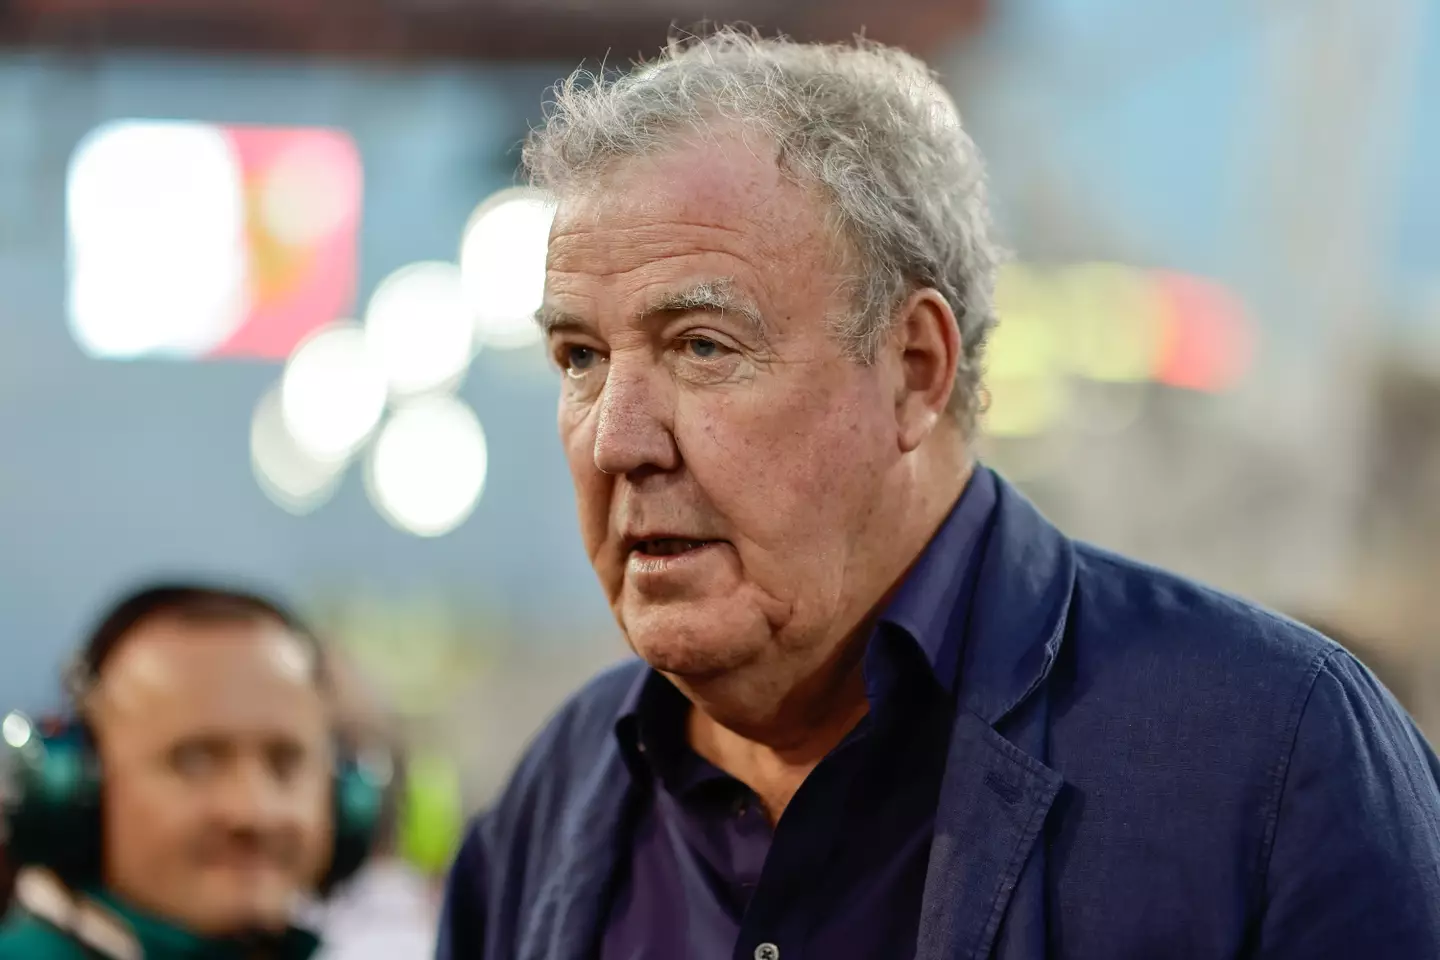 Clarkson and his Grand Tour colleagues have fallen foul of being used as the face of crypto scams (Qian Jun/MB Media/Getty Images)